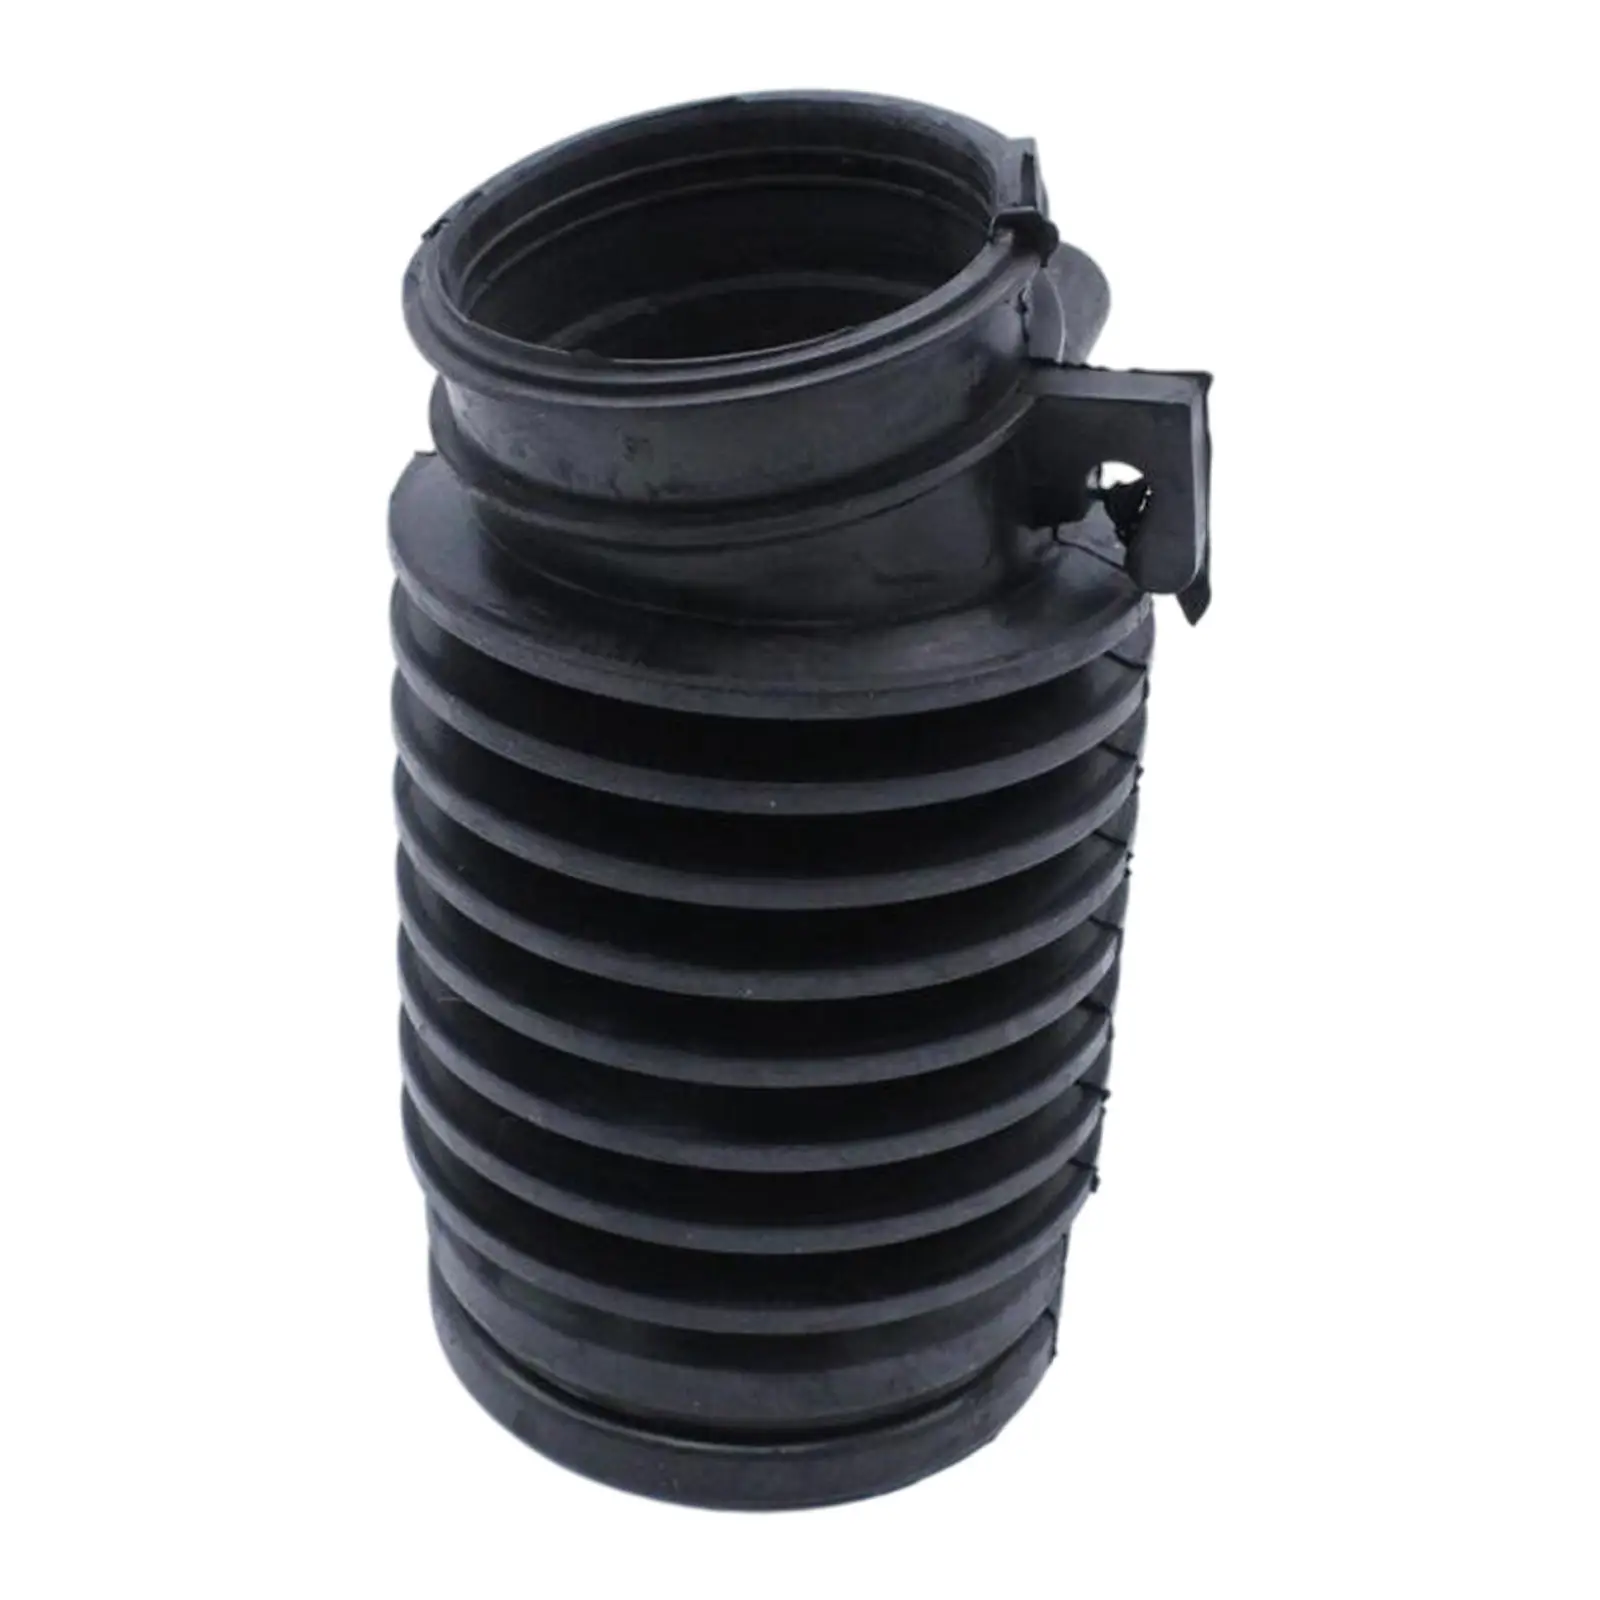 Air Intake Hose 17228Rcaa00 Spare Parts Replacement for Honda Accord V6 3.0L 2003-2007